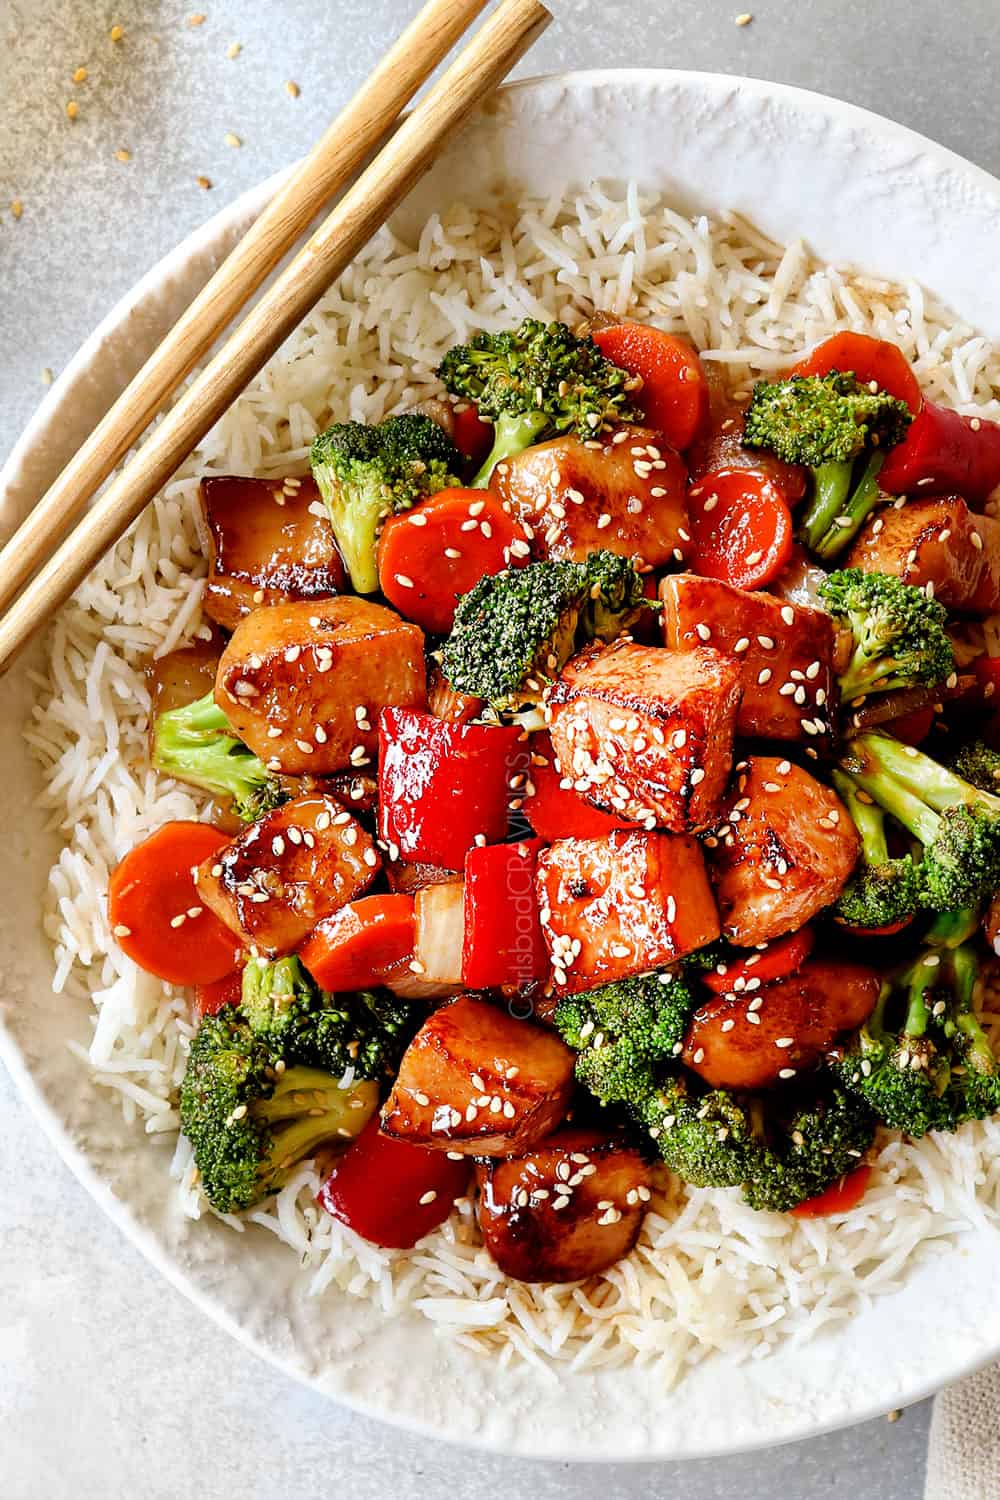 Chicken and broccoli stir fry with rice and chopsticks.